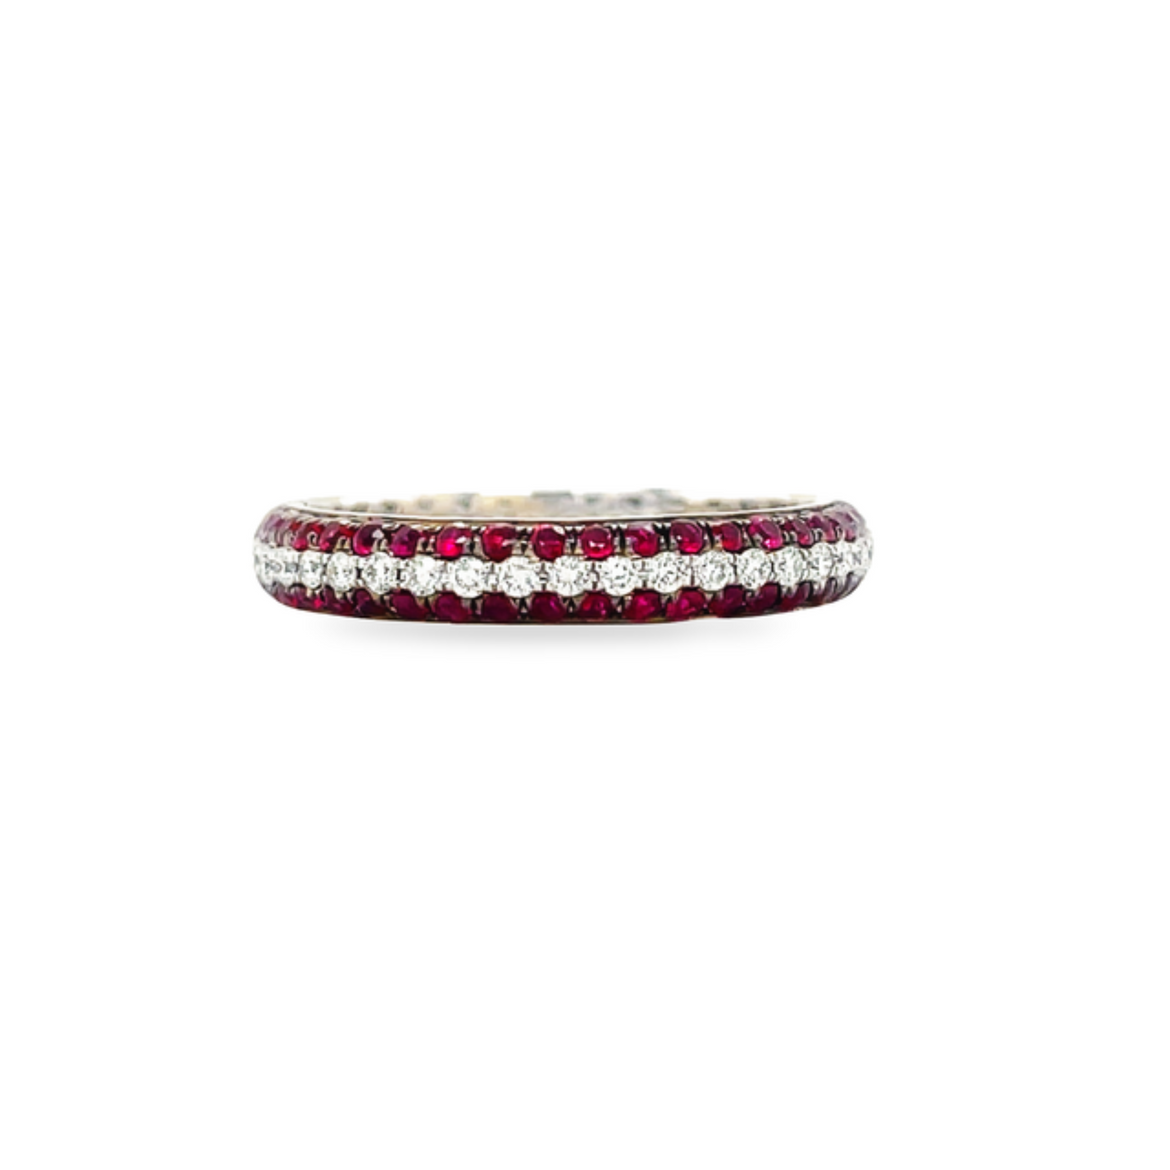 Stackable bands  Bright & bold colors set in sparking diamond pave mountings.  18k white gold.   3.50 mm width   Round diamonds 0.22 cts  6.5 size (sizeable)  0.49 cts rubies